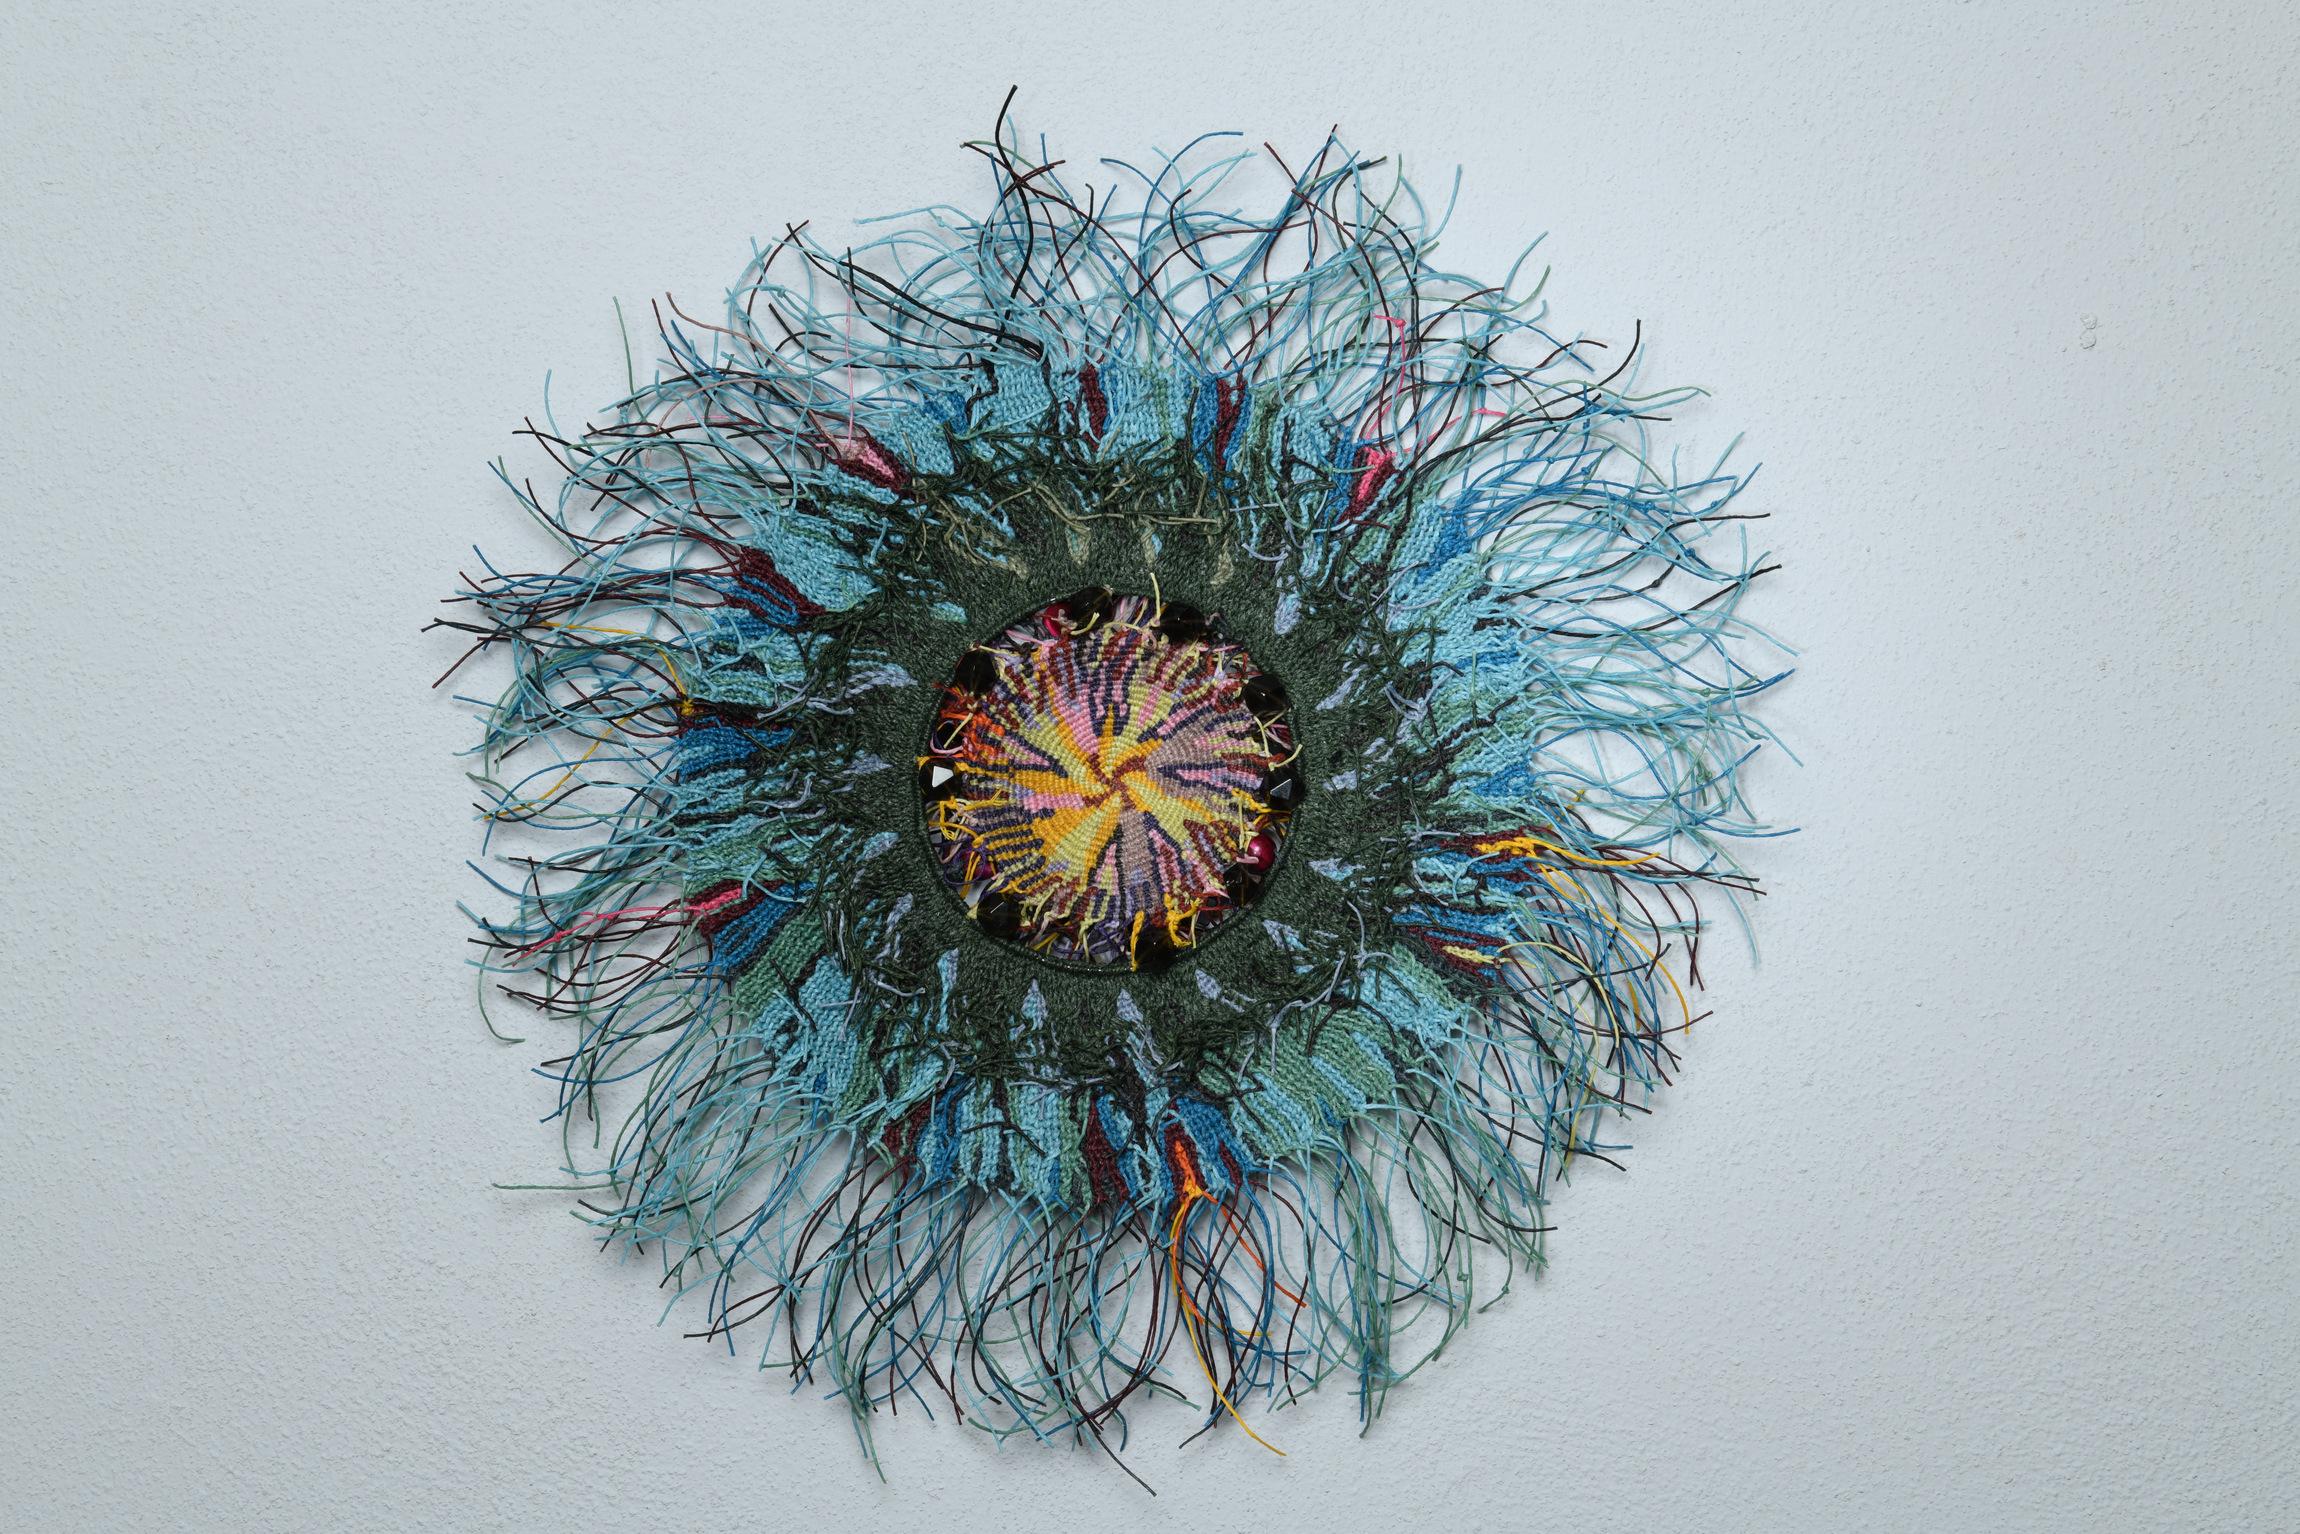 Sun Smith-Forêt Abstract Sculpture - Contemporary Mixed Media Textile Sculpture with Linen and Semi Precious Stones